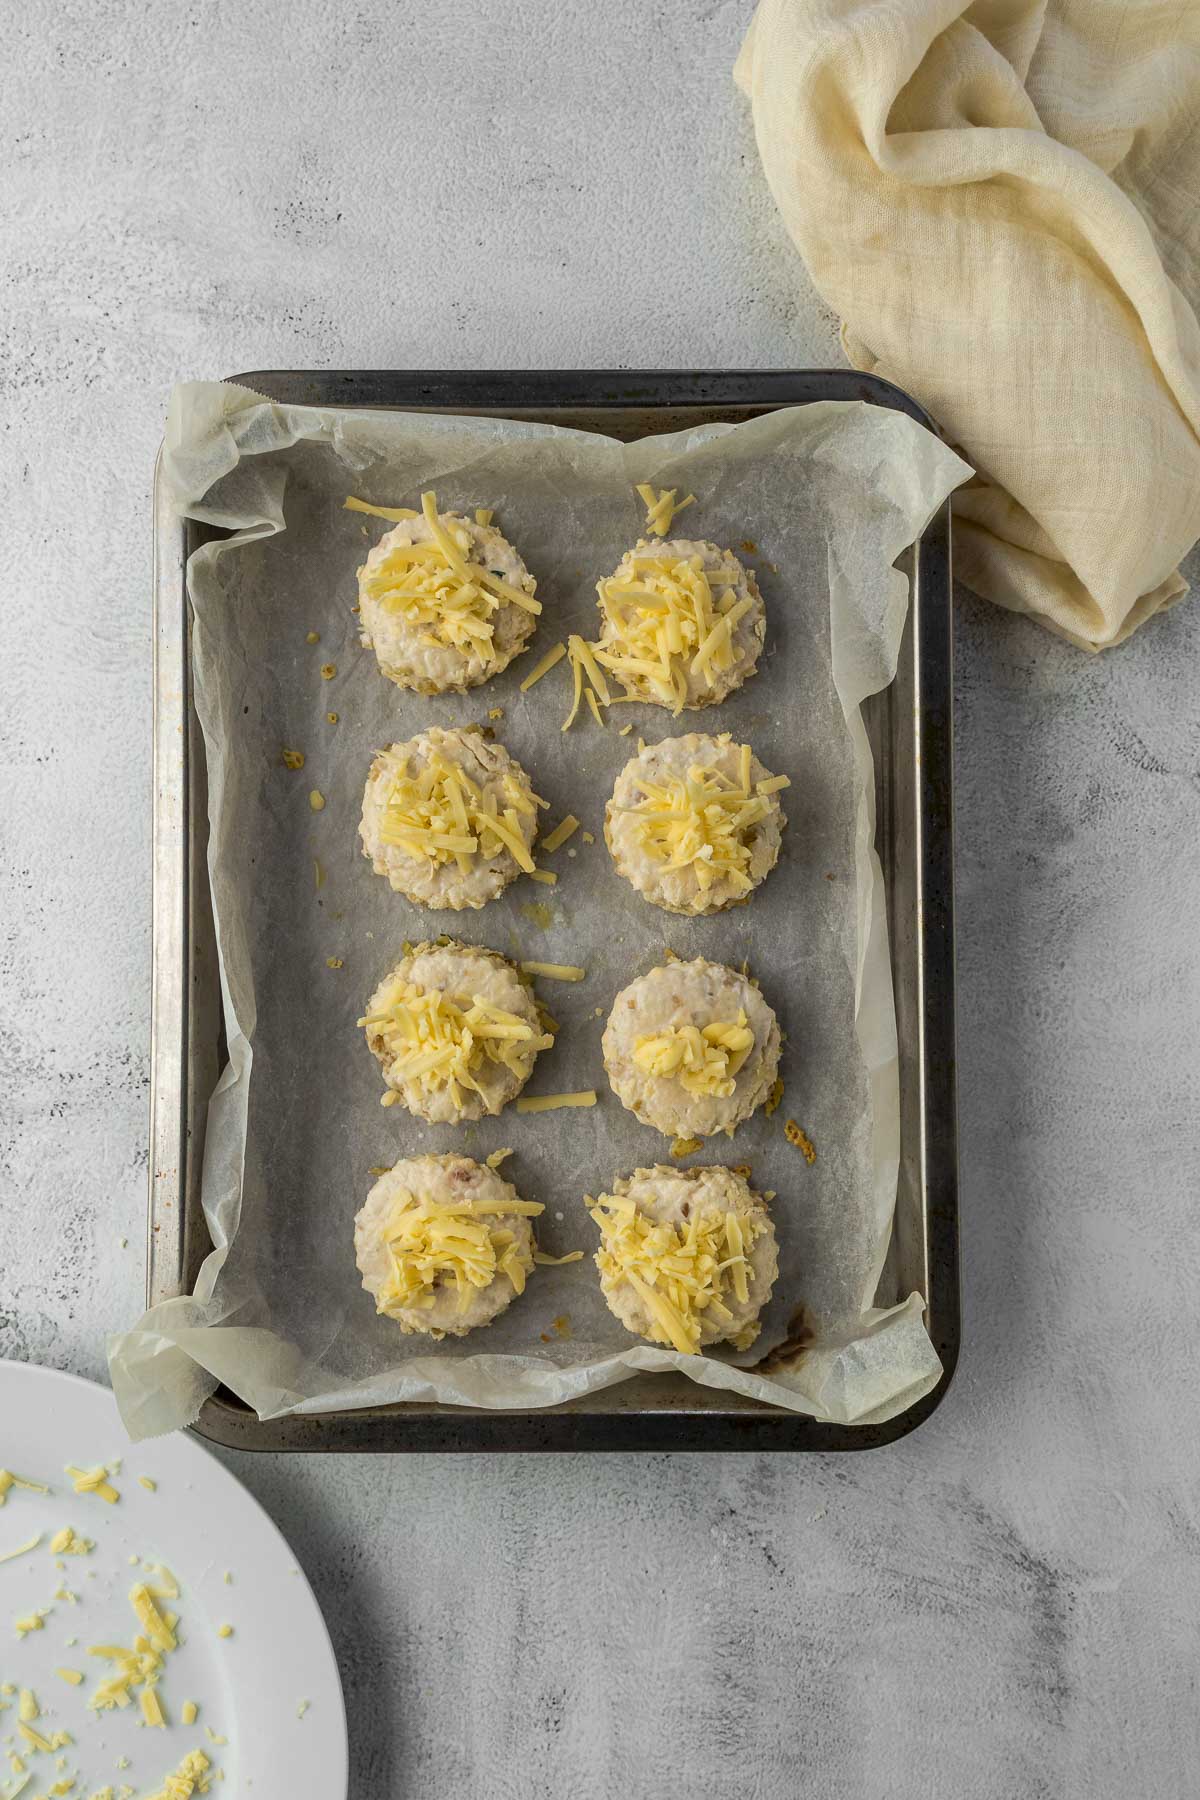 Scones on a baking tray topped with cheese.